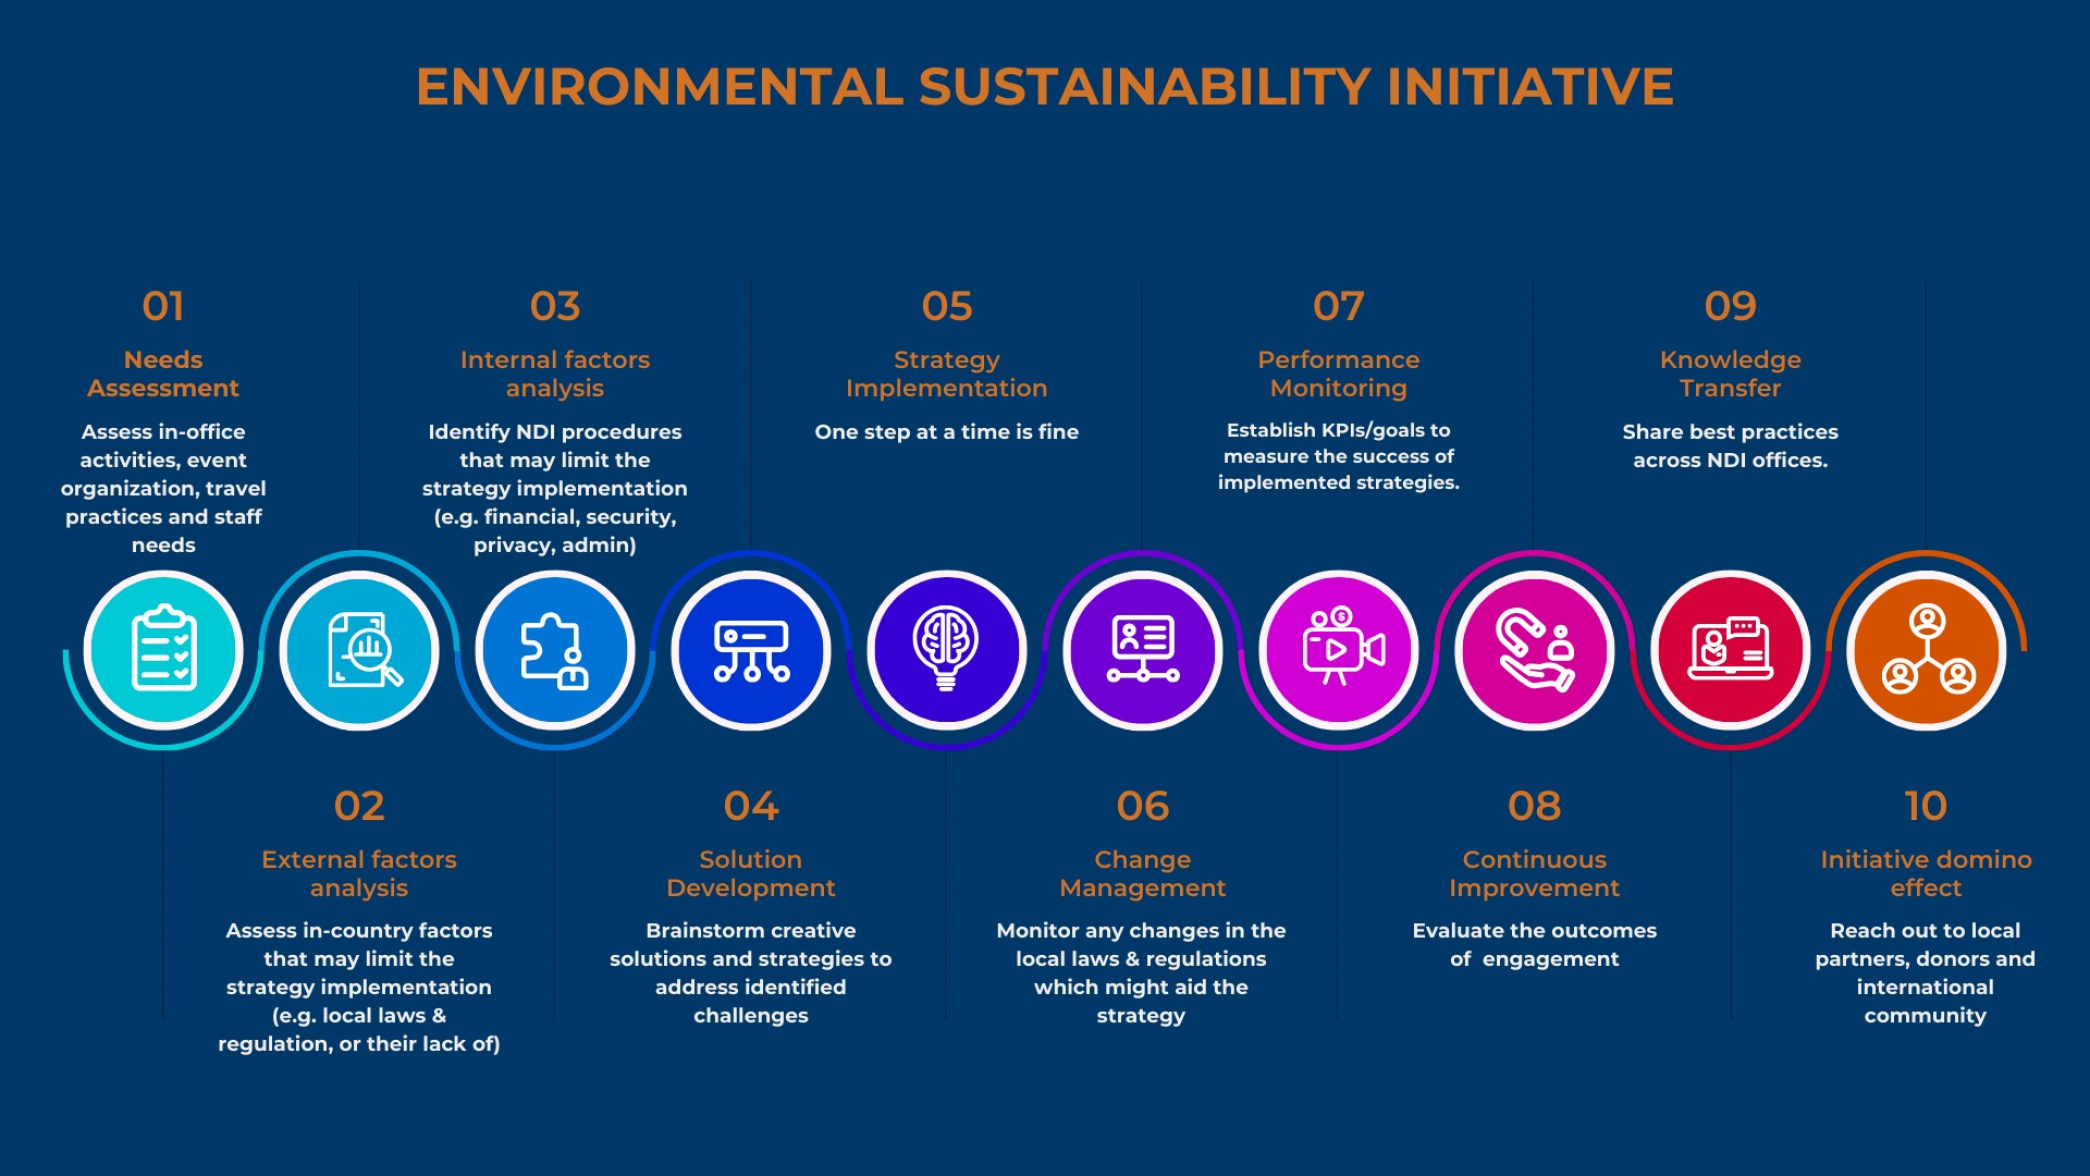 Steps in the Environmental Sustainability Initiative process. Graphic created by the Sustainability Initiative Co-chairs.